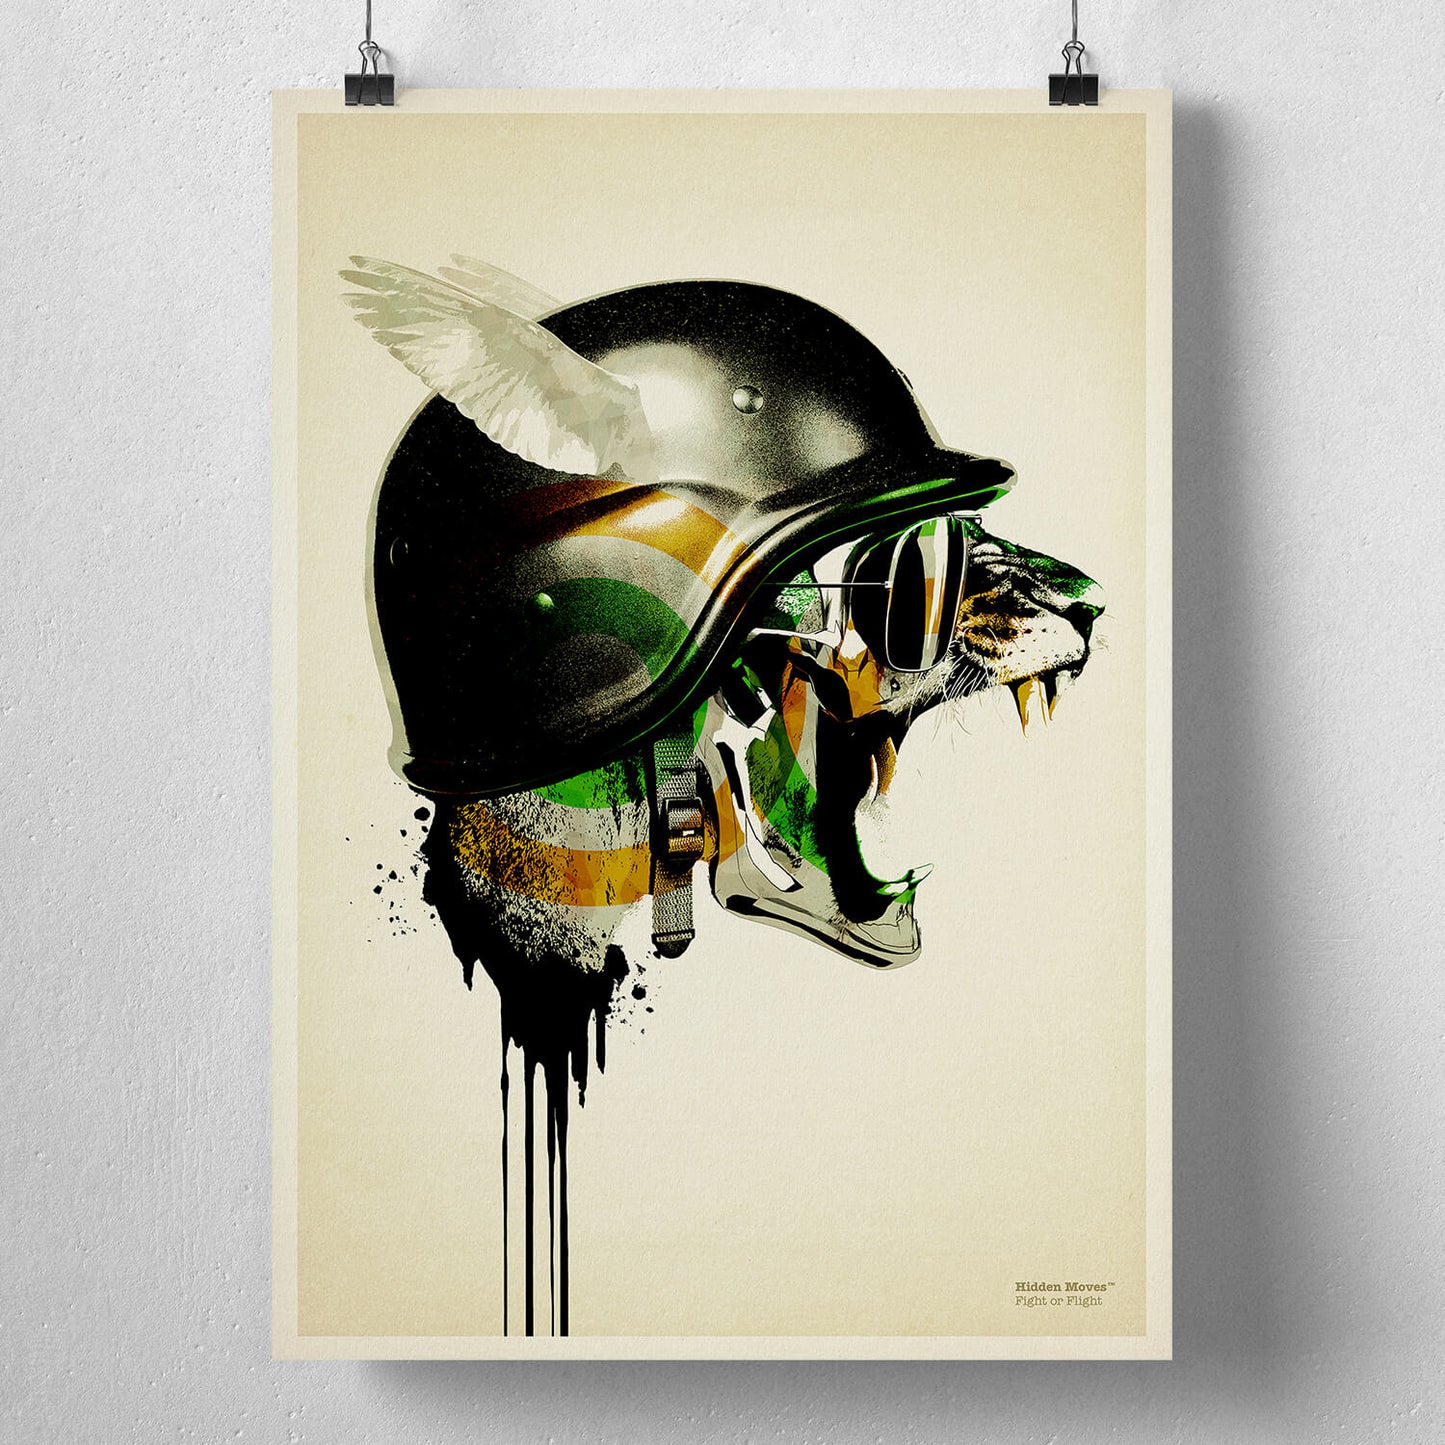 Fight or Flight Signed Print from Hidden Moves